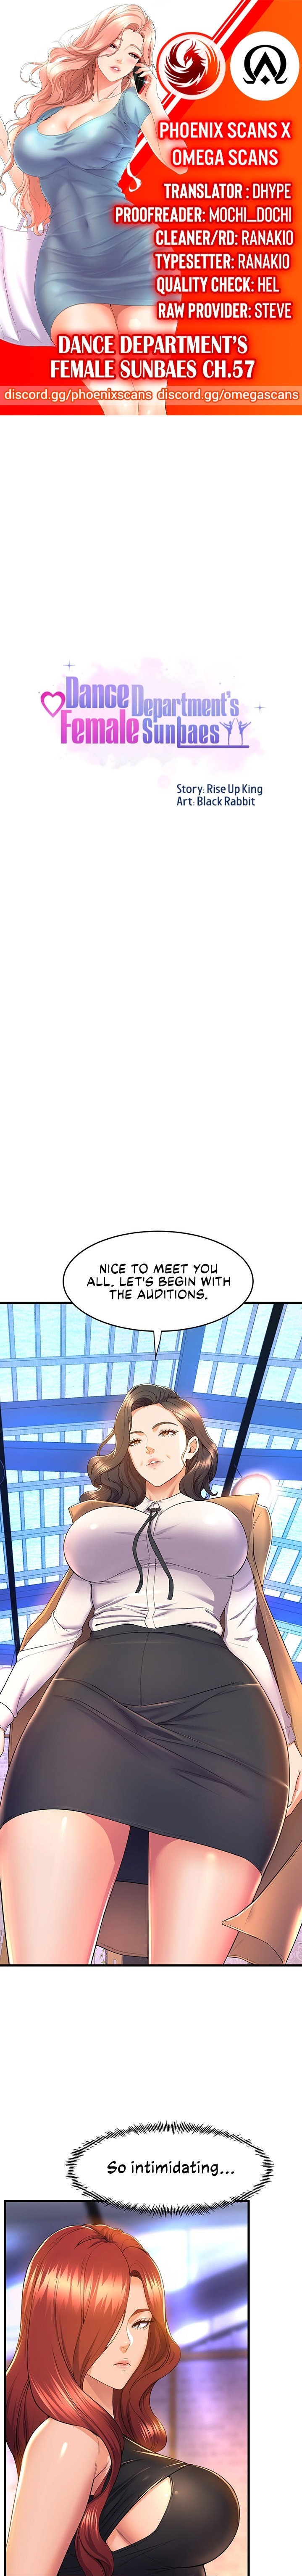 Dance Department’s Female Sunbaes - Chapter 57 Page 1